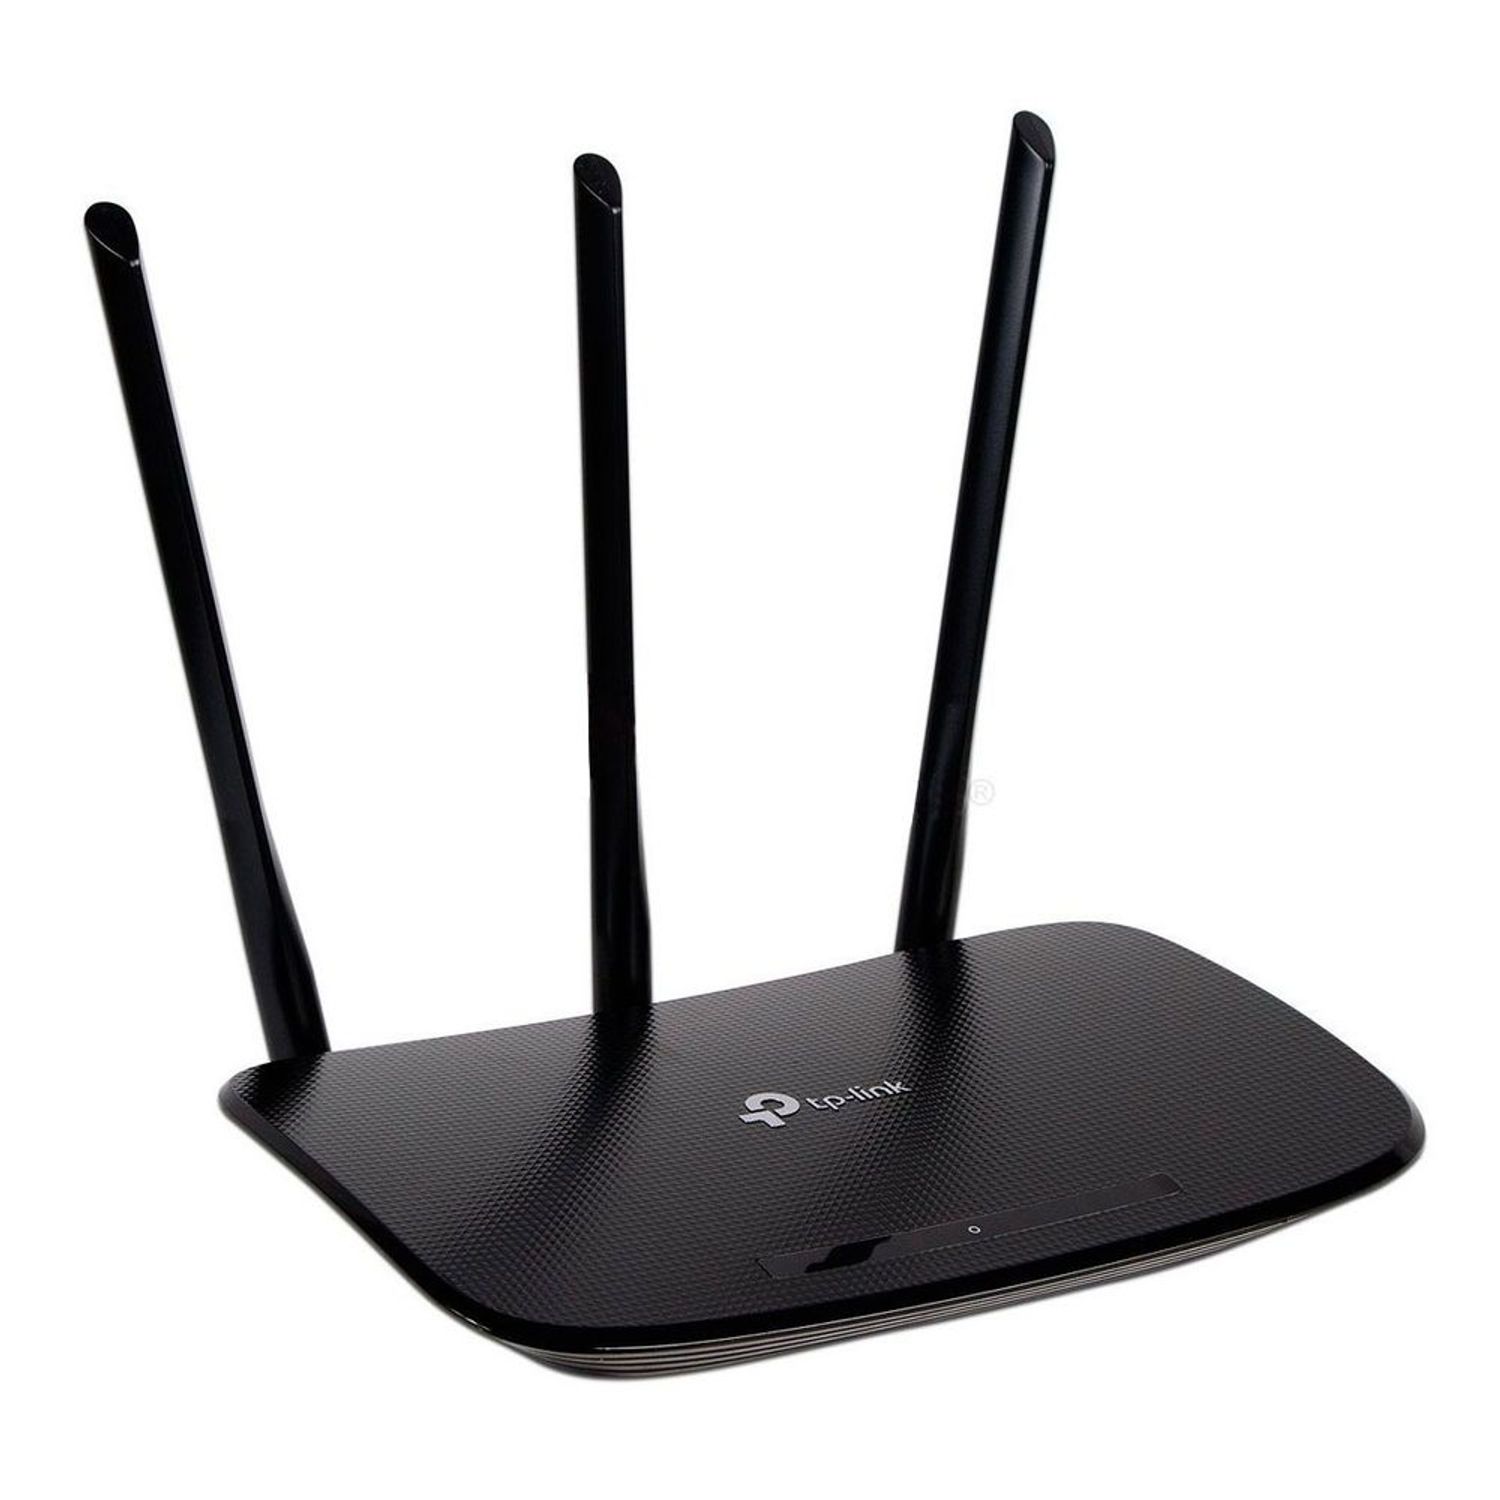 juego incrementar tubo Router TP-LINK 450 Mbps TL-WR940N 3 en 1 repetidor punto de acceso 3 A |  Oechsle - Oechsle